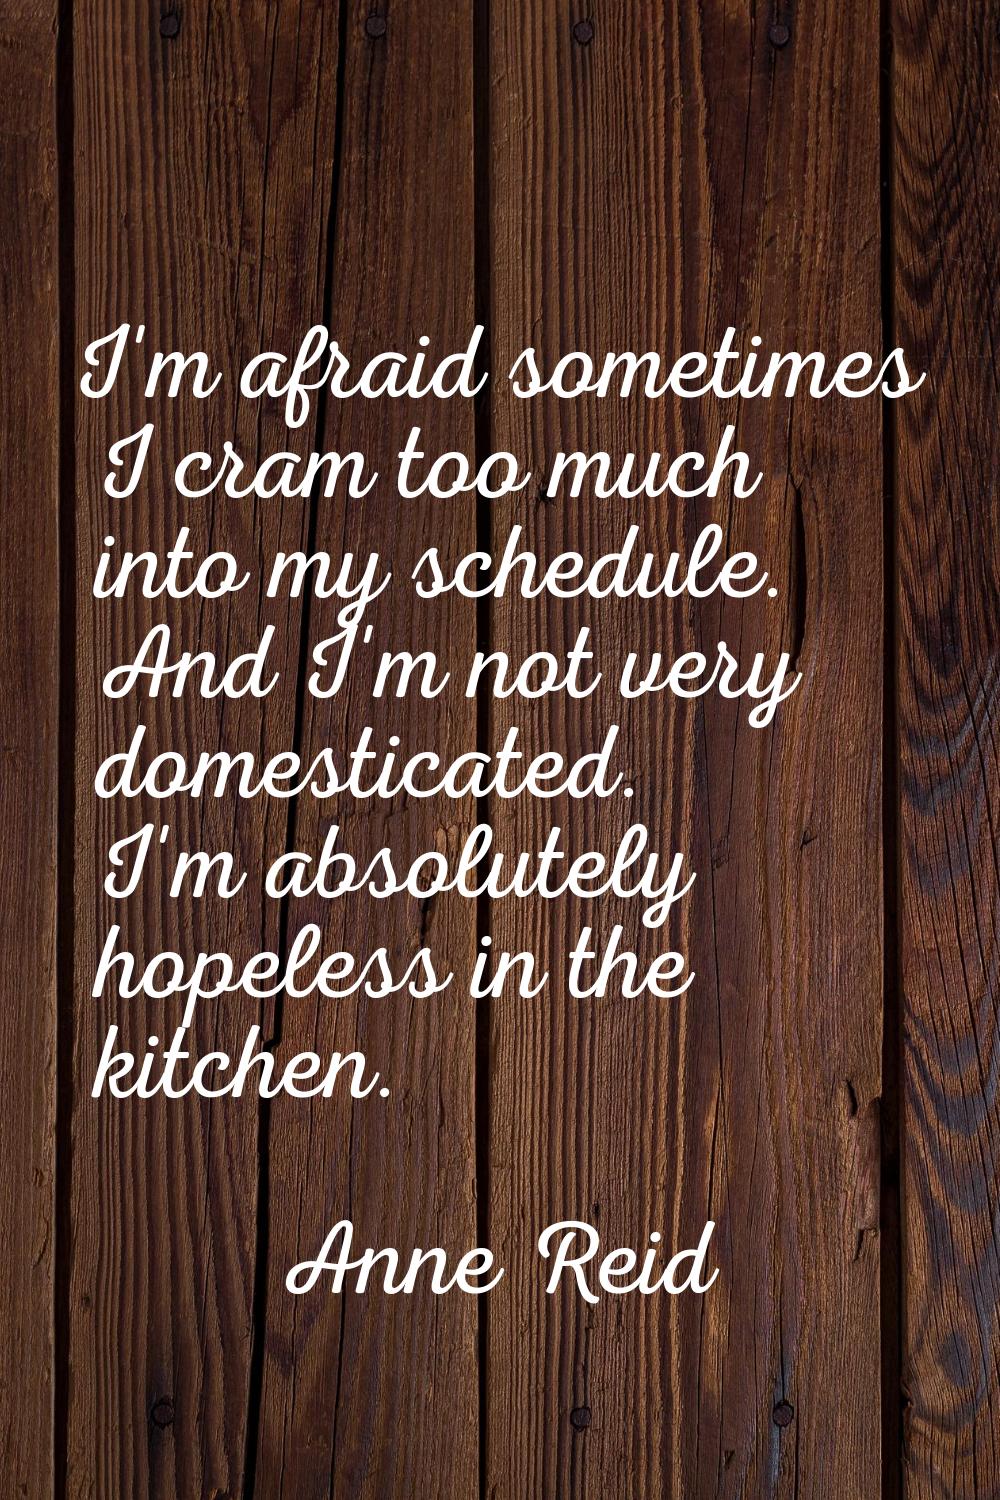 I'm afraid sometimes I cram too much into my schedule. And I'm not very domesticated. I'm absolutel